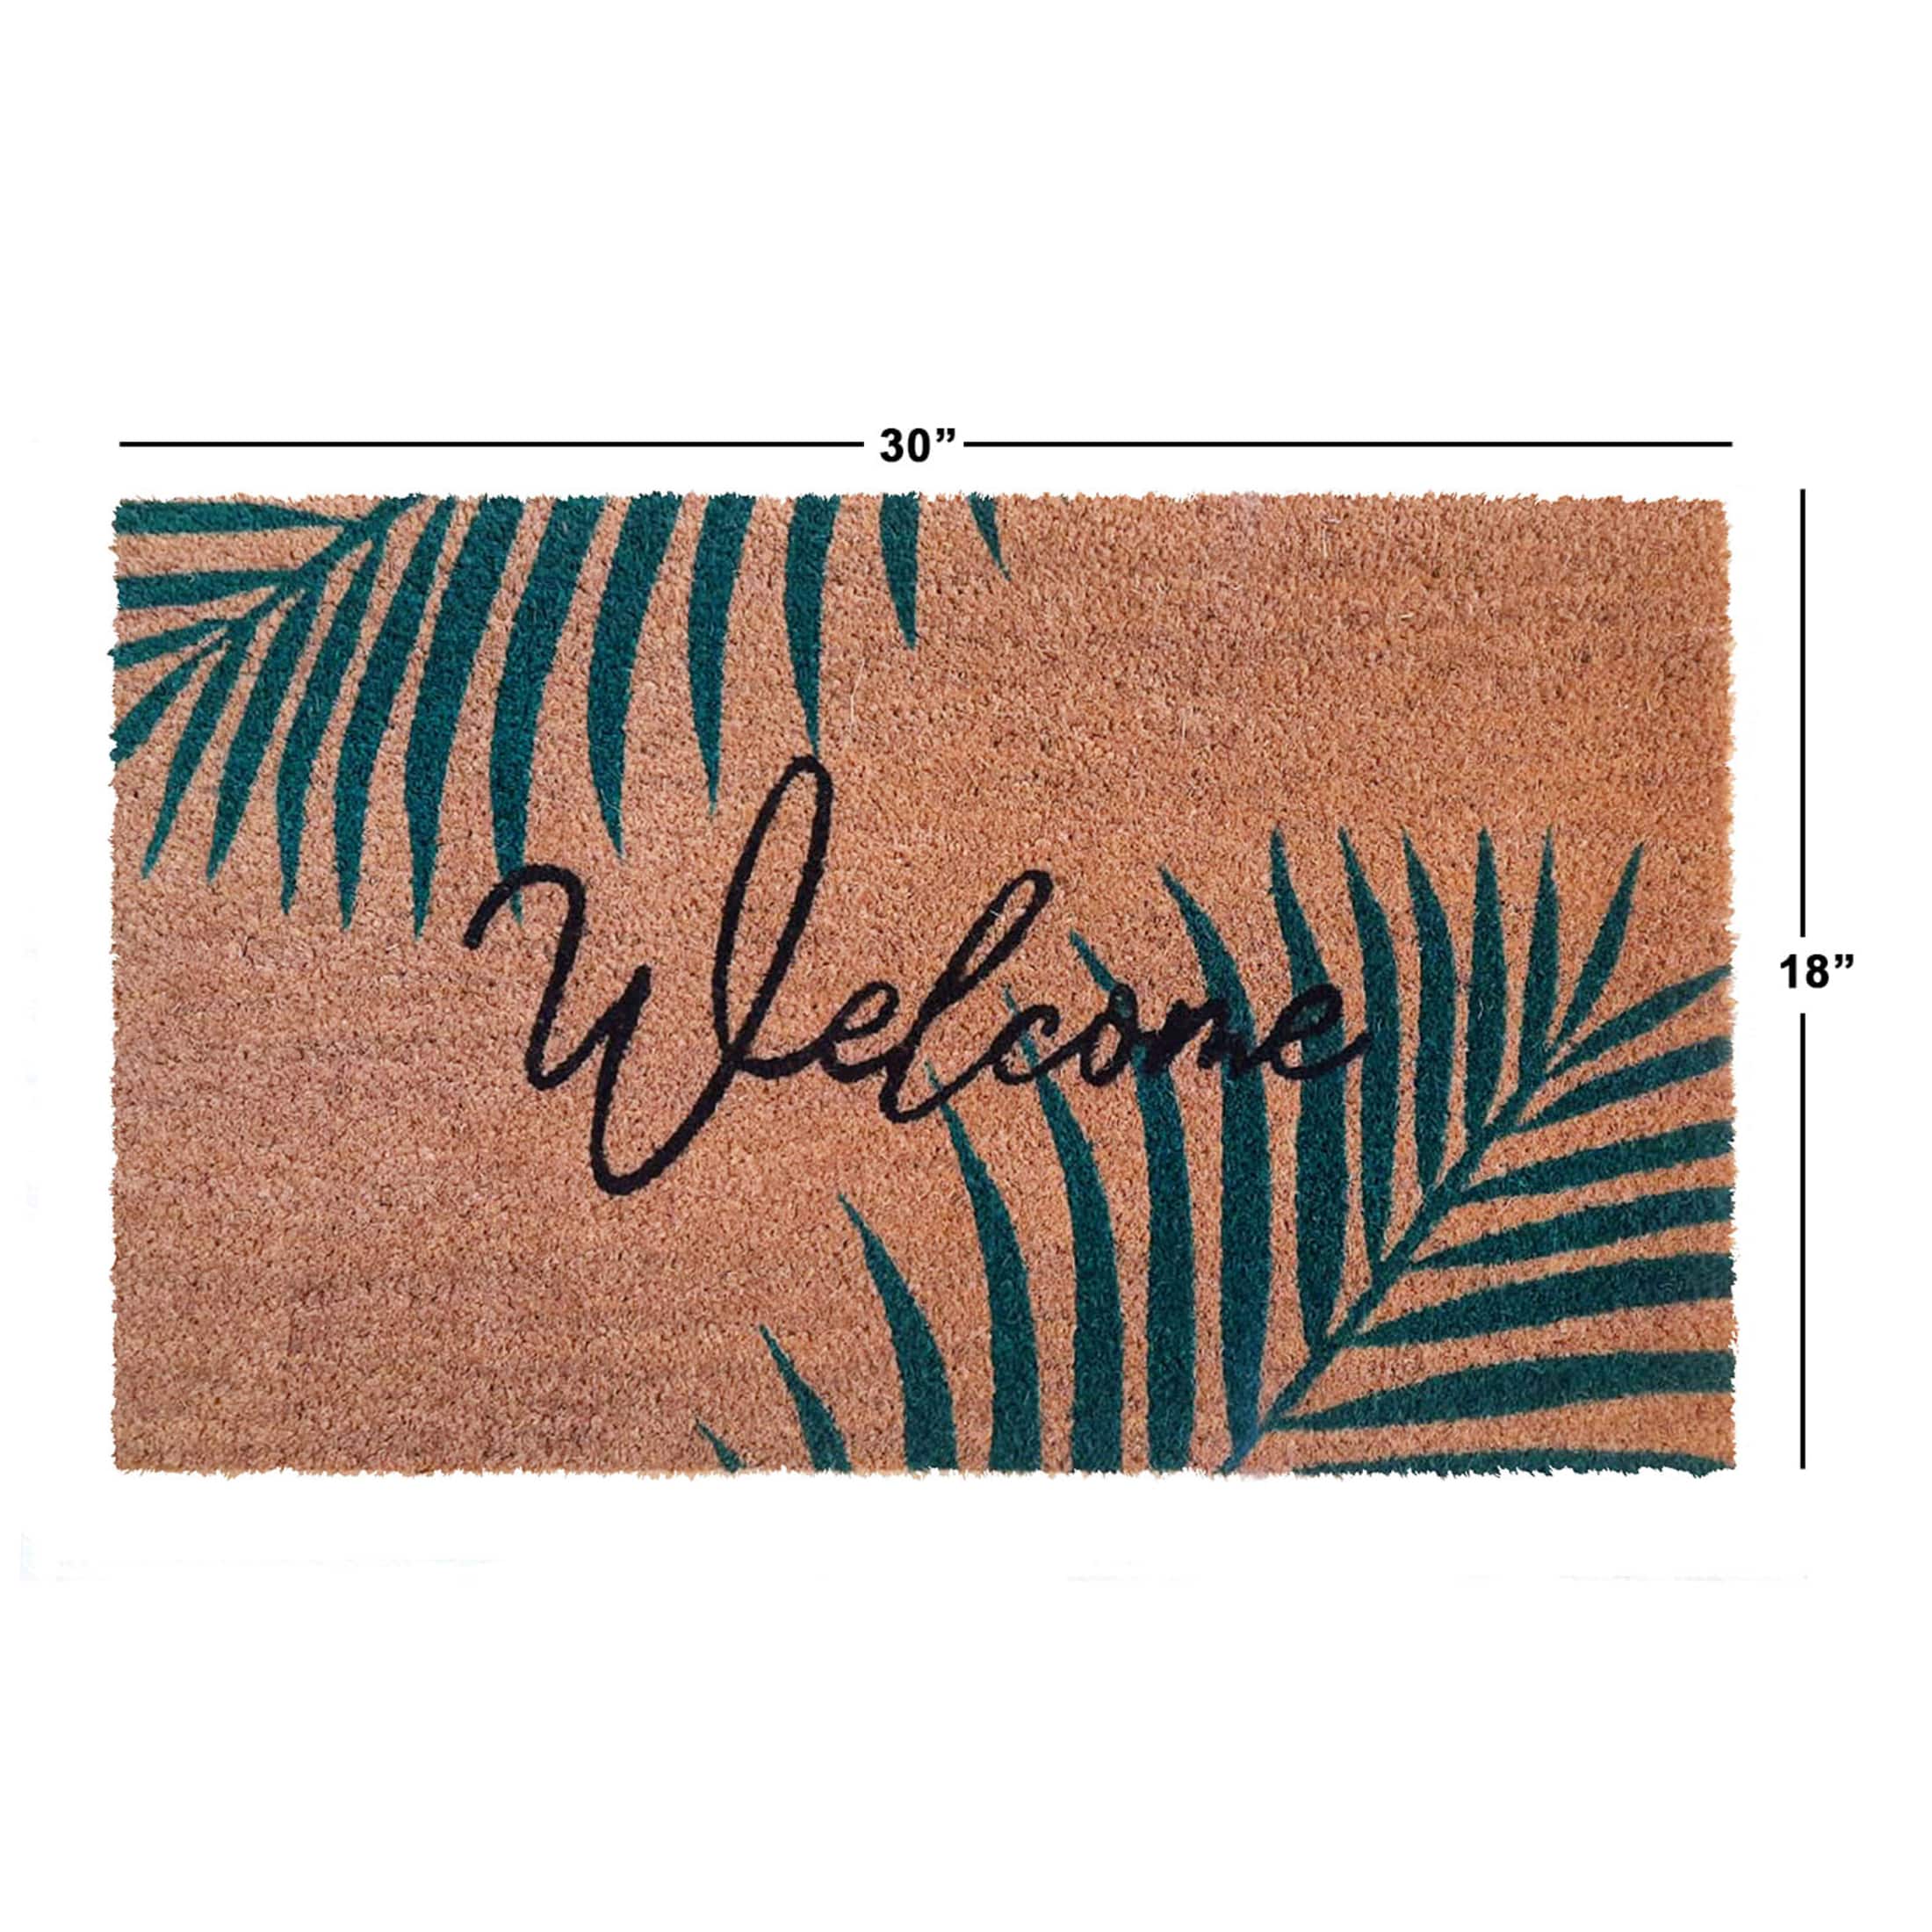 RugSmith Multicolor Machine Tufted Welcome Palm Leaves Doormat